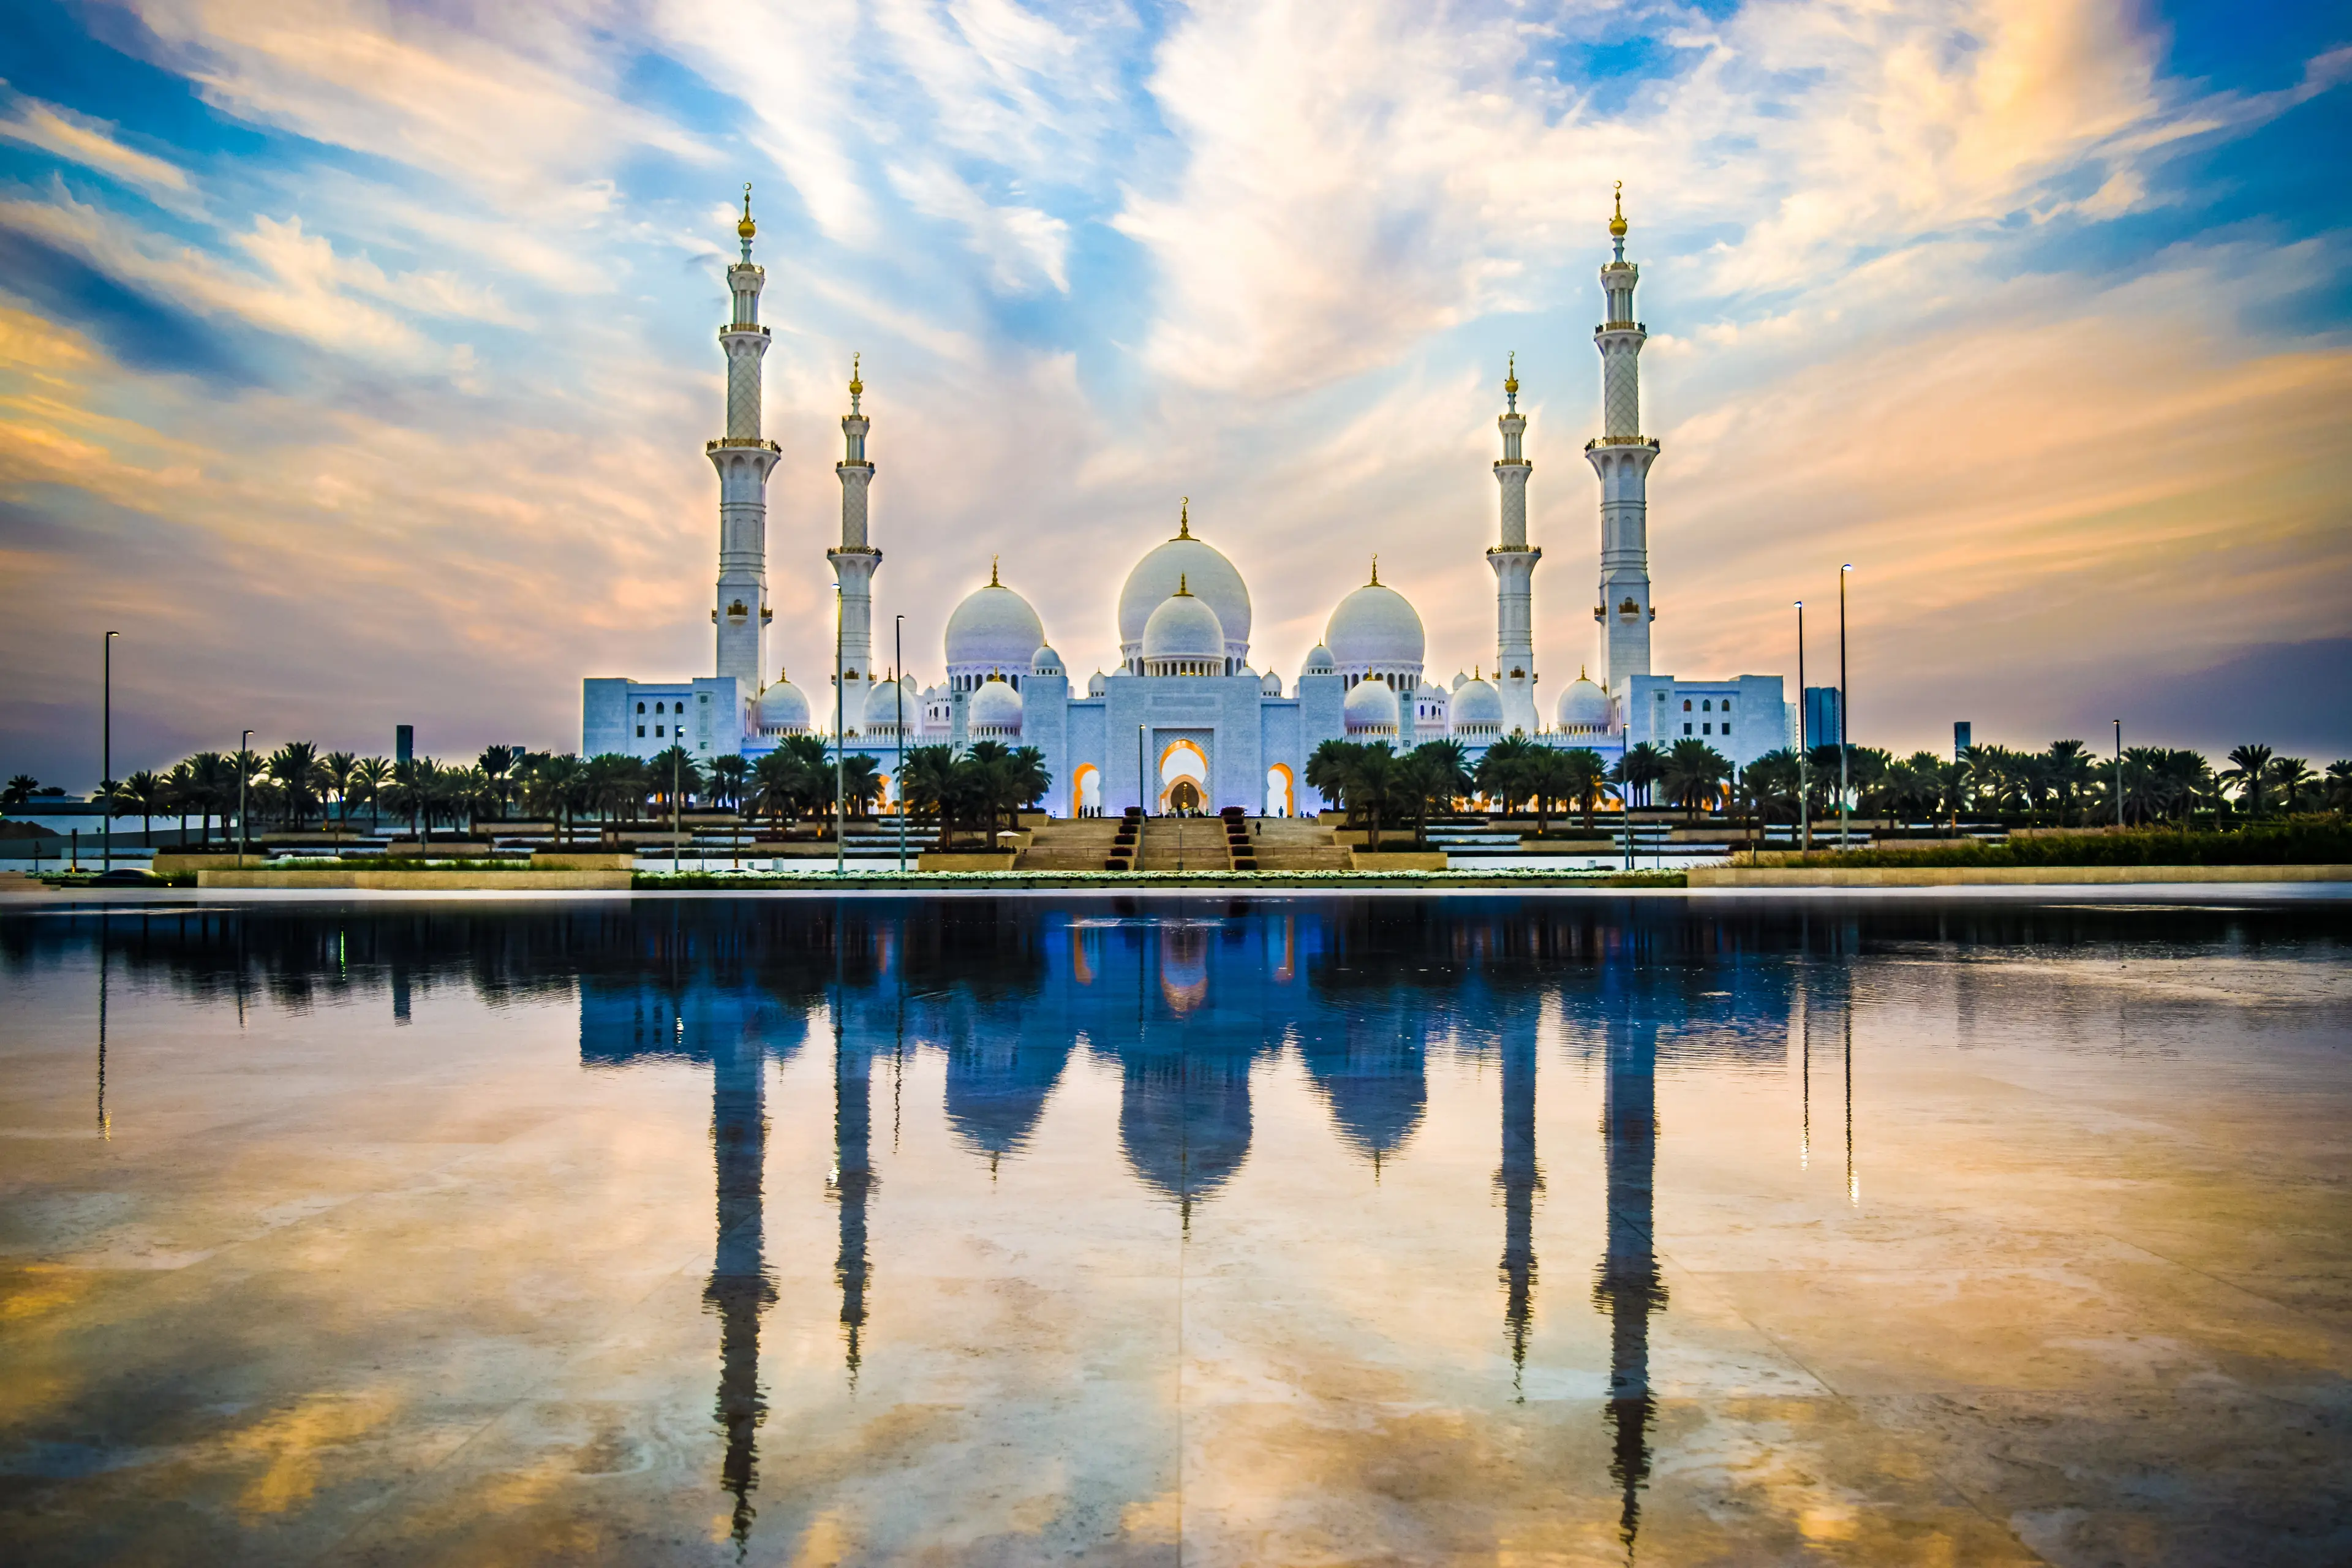 5-Day Family Relaxation & Sightseeing Tour in Abu Dhabi